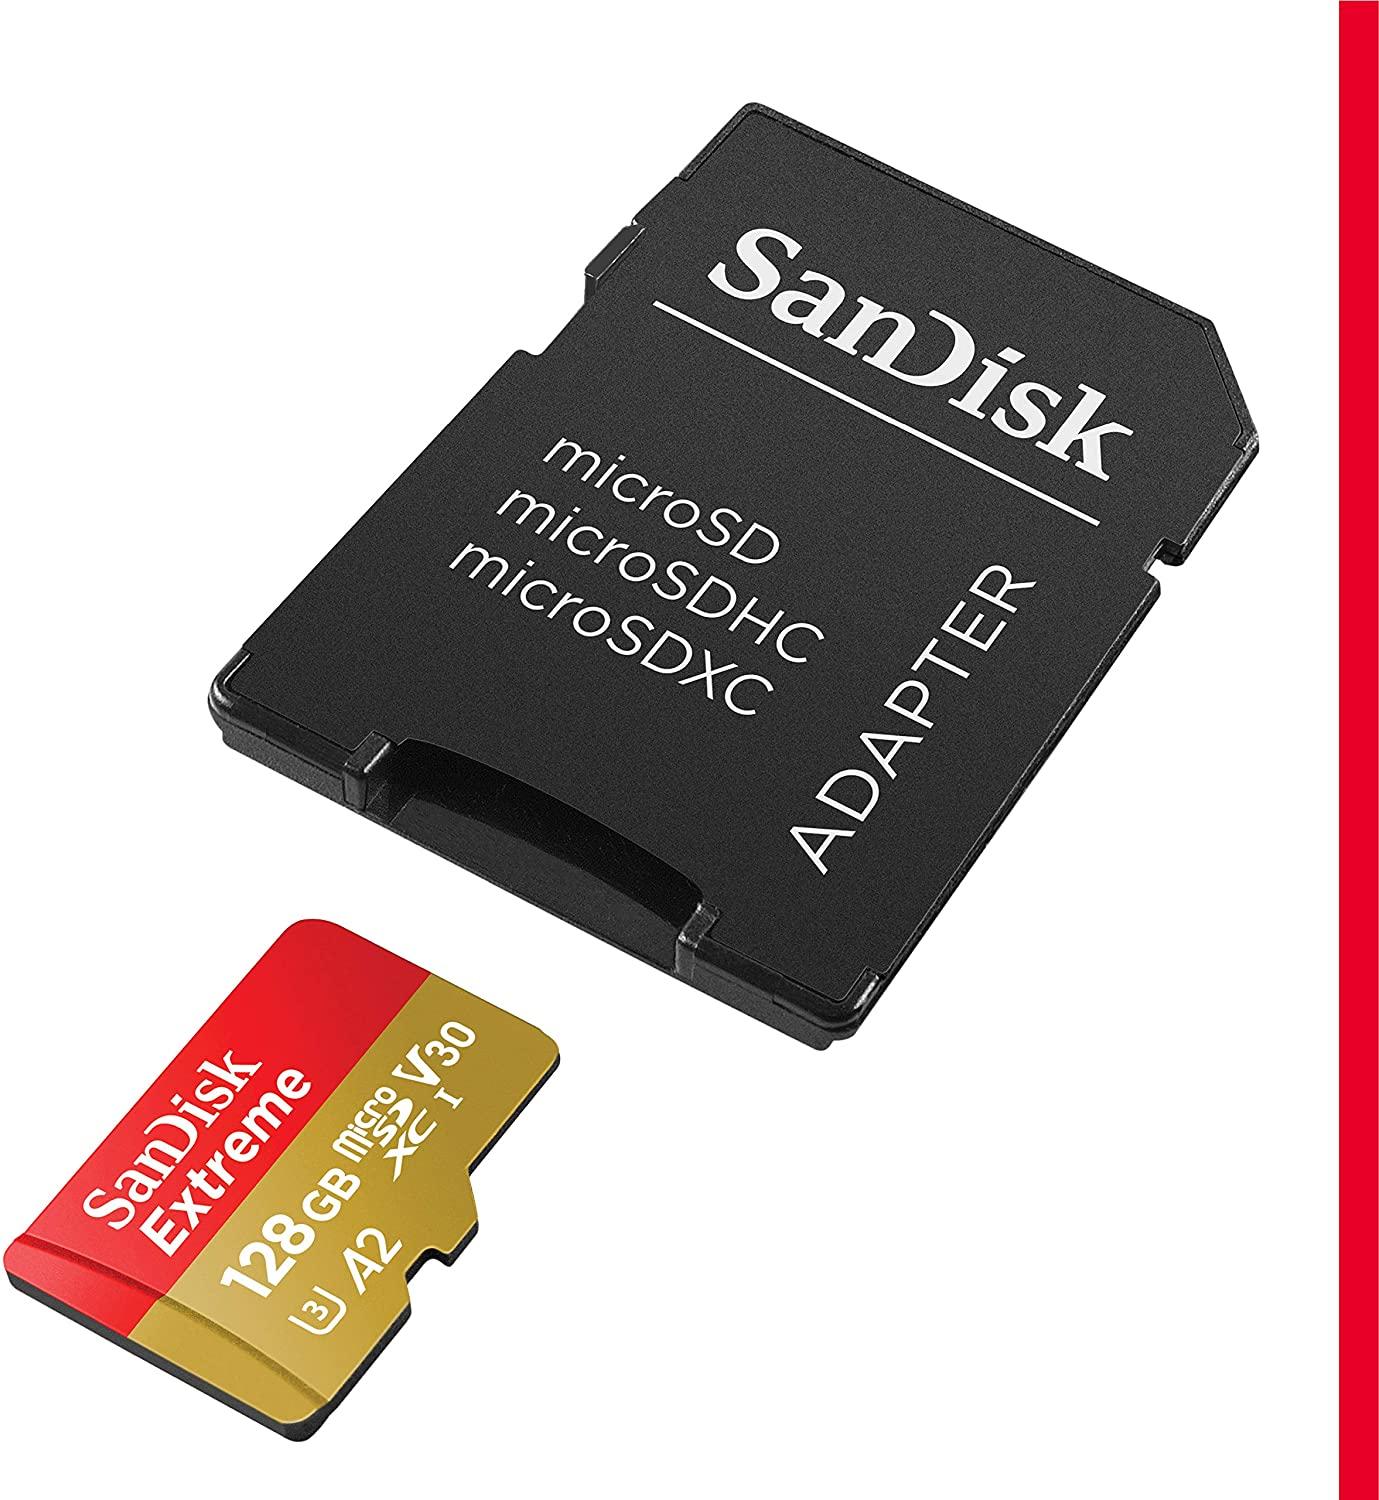 sandisk-extreme-micro-sd-card-128gb-with-sd-adapter-1_1379x.jpg